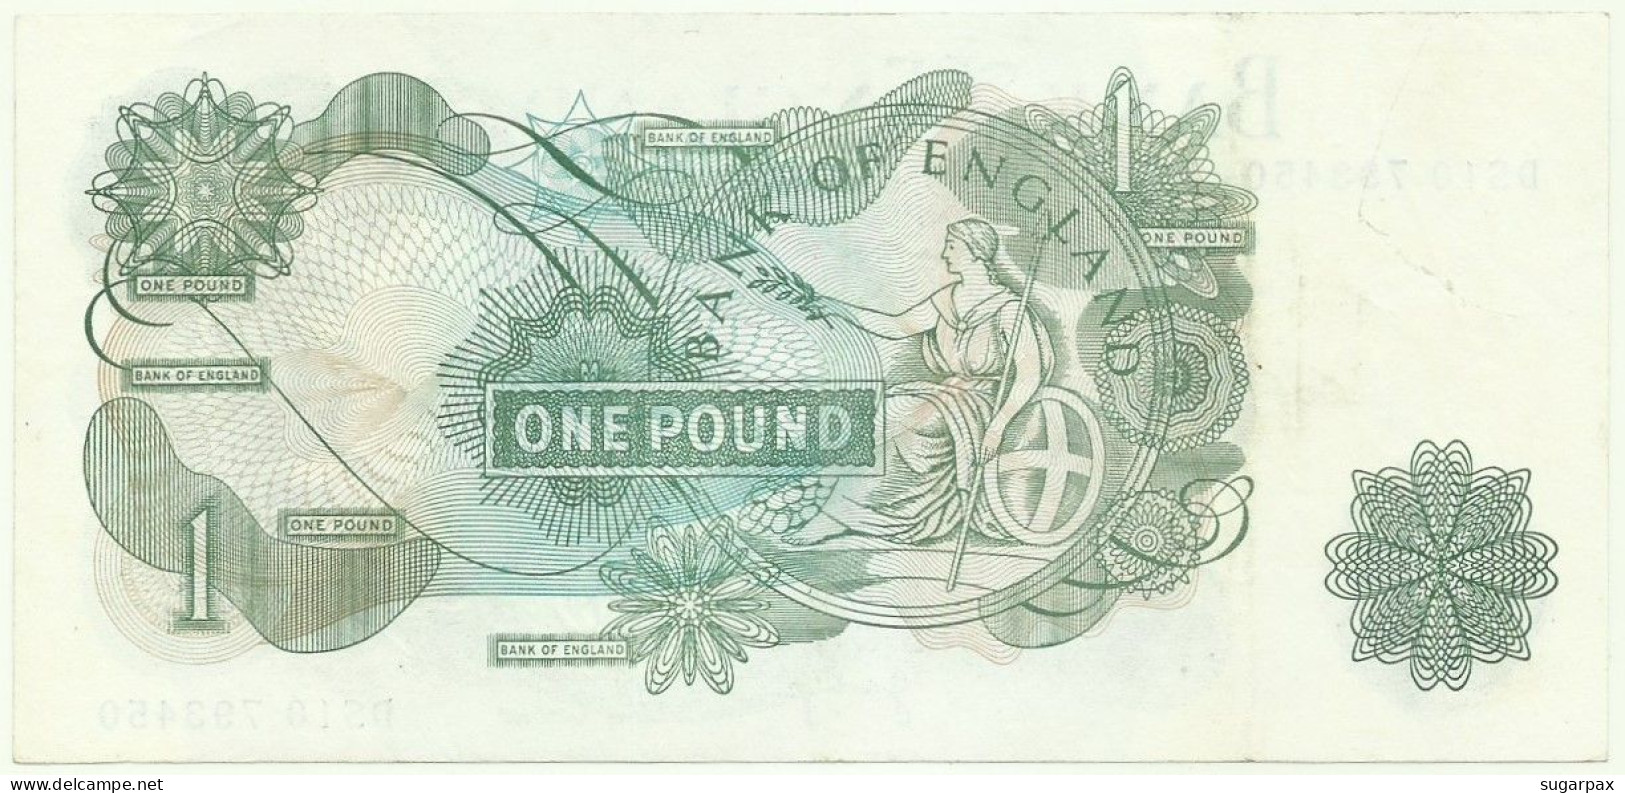 GREAT BRITAIN - 1 POUND - ND ( 1970-77 ) - P 374 G - Serie DS10 - BANK OF ENGLAND - United Kingdom - 1 Pound